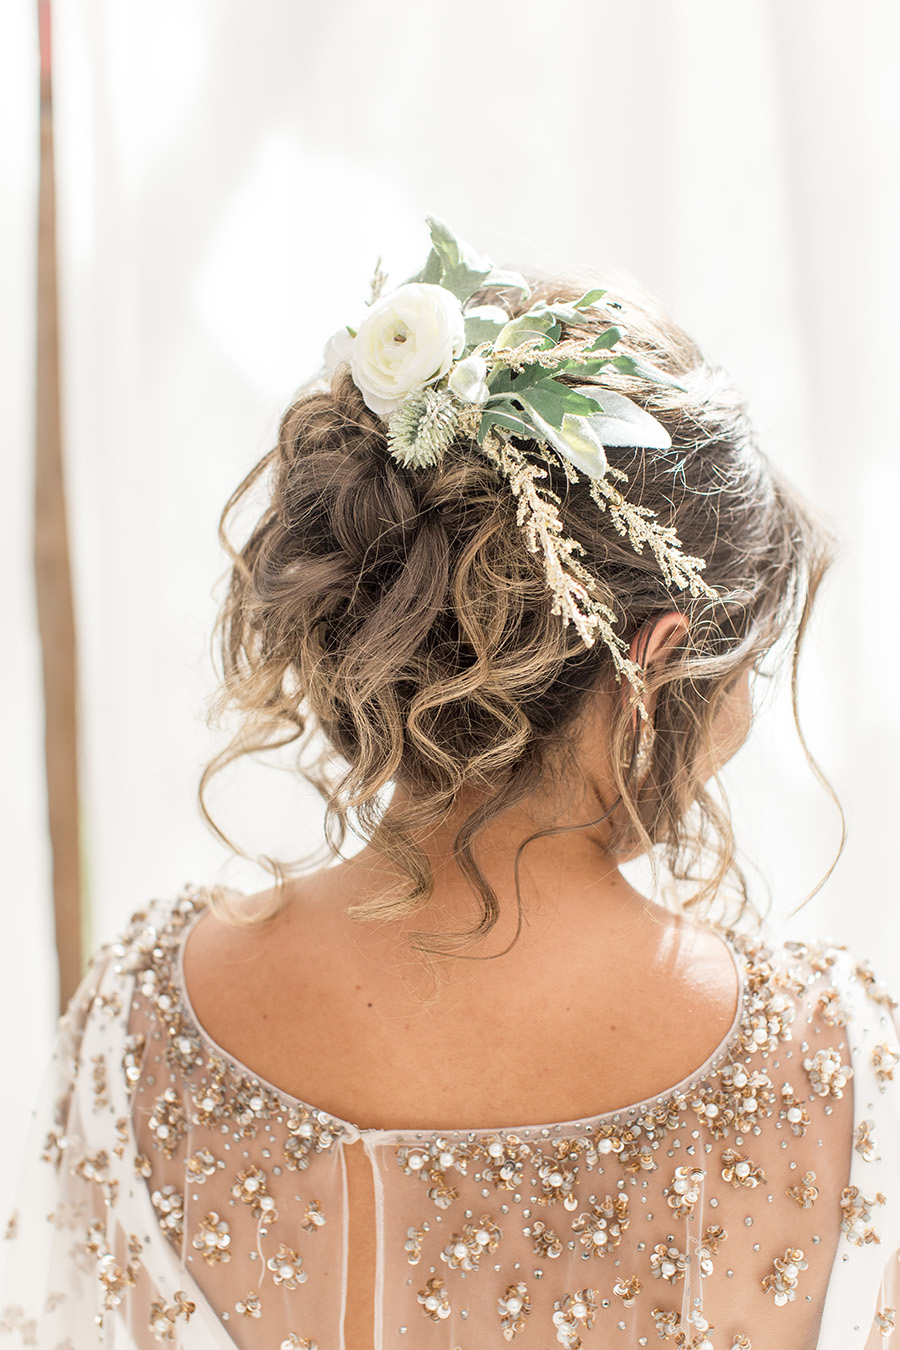 Messy wedding updo with floral hairpiece